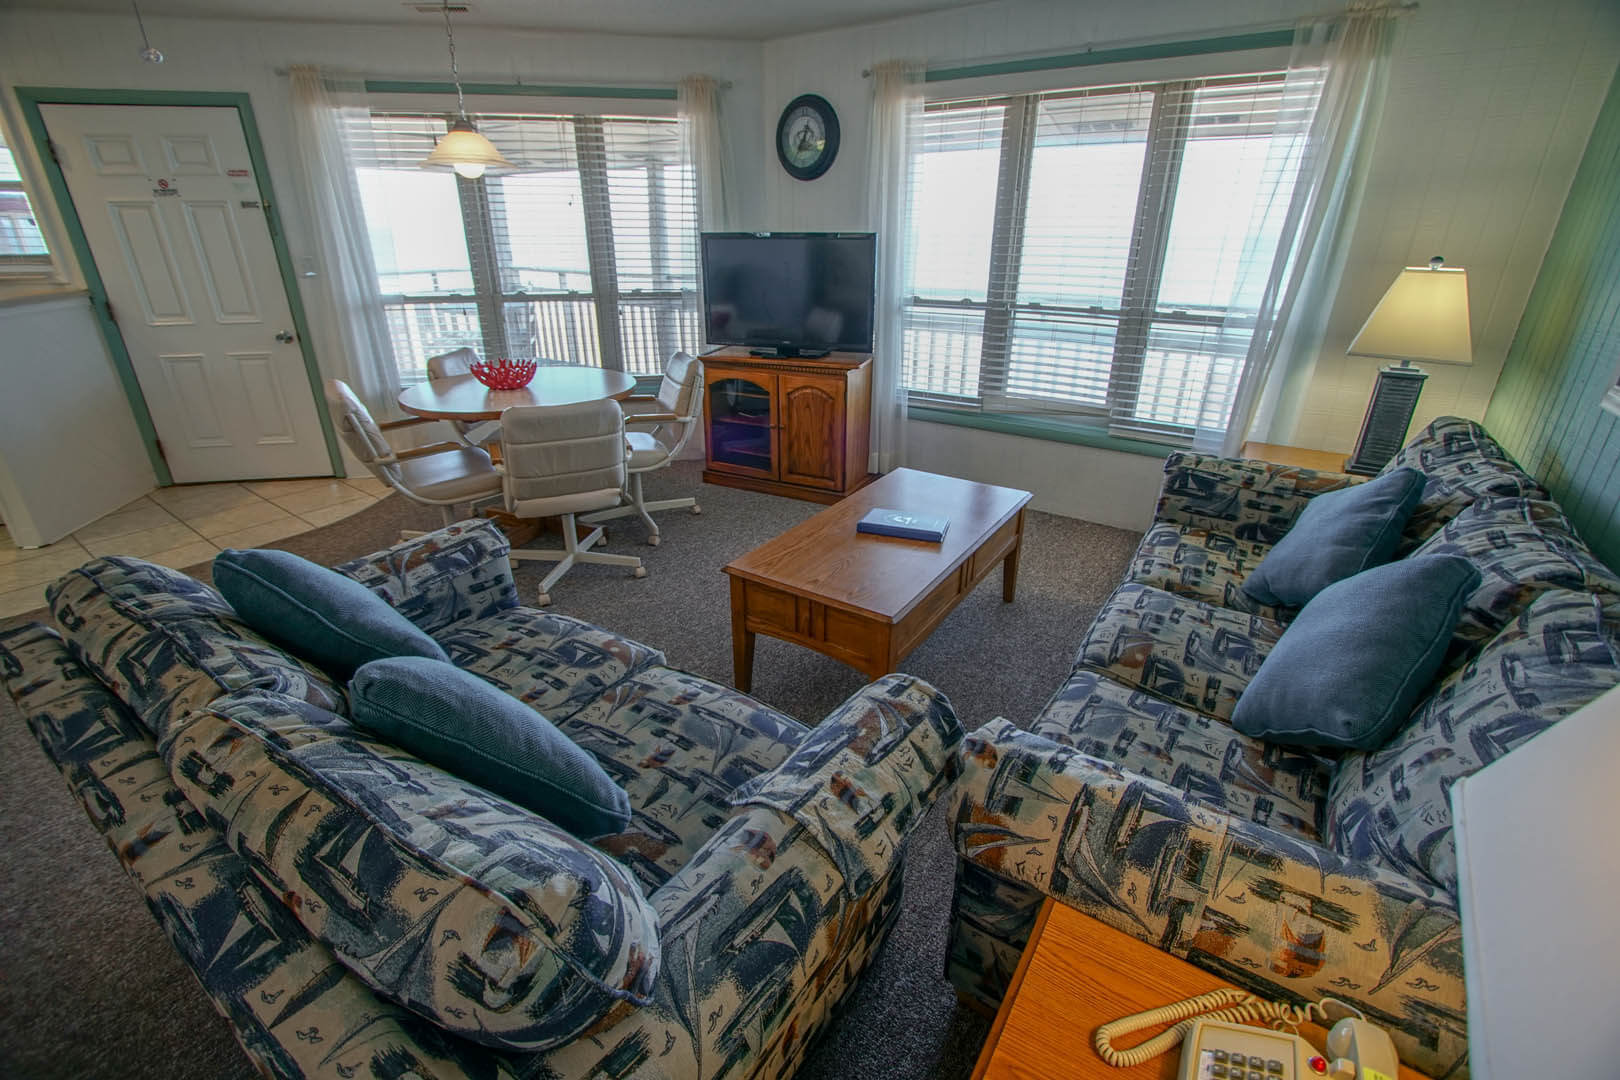 A peaceful living room area with a view at VRI's Outer Banks Beach Club in North Carolina.